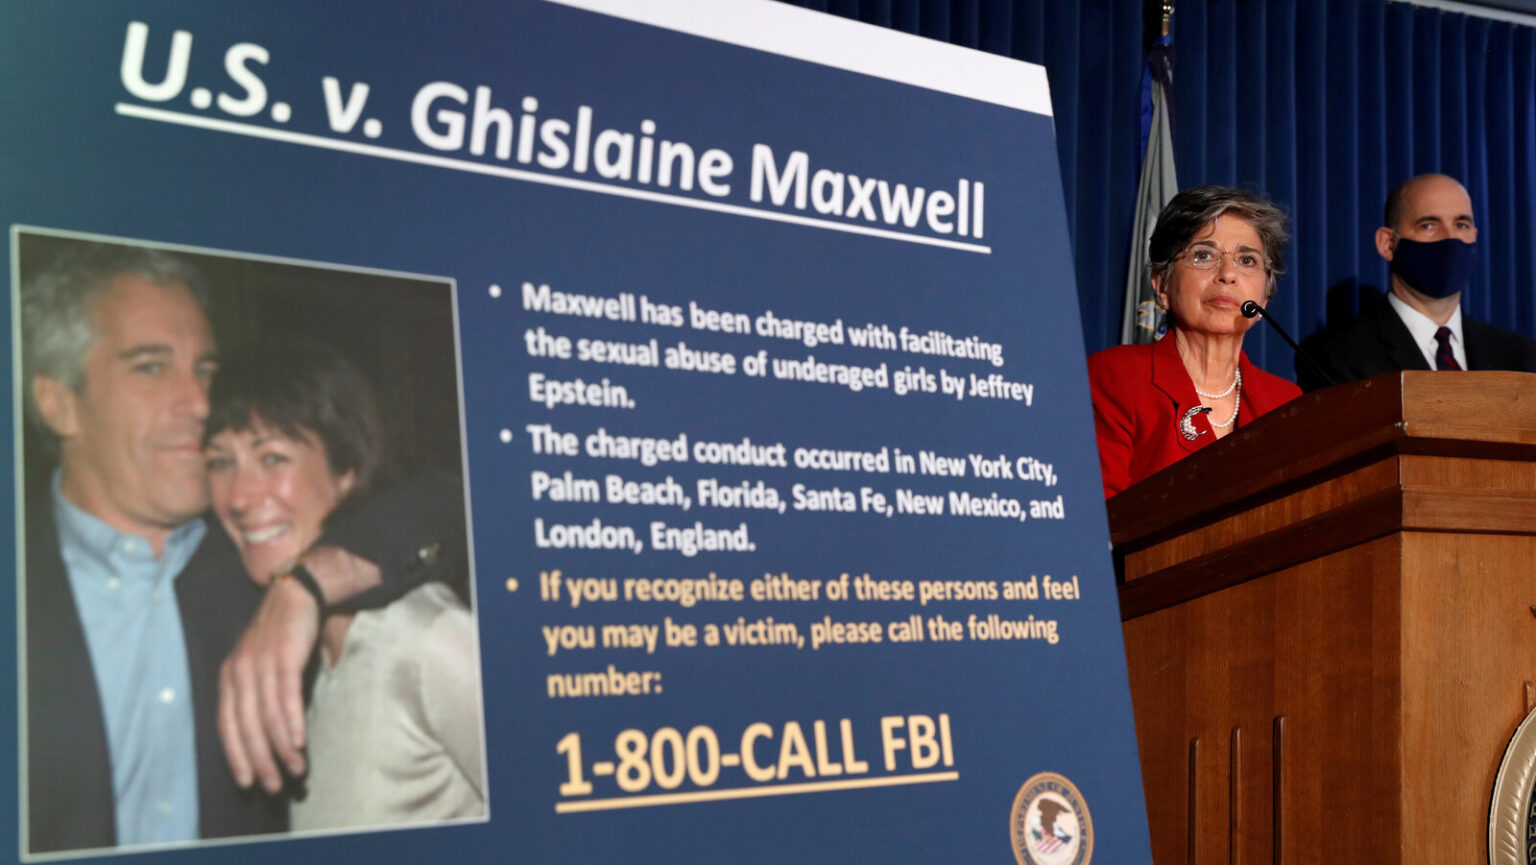 Is Ghislaine Maxwell getting bail now? Delve into new claims from prosecutors about Maxwell's cushy prison lifestyle.